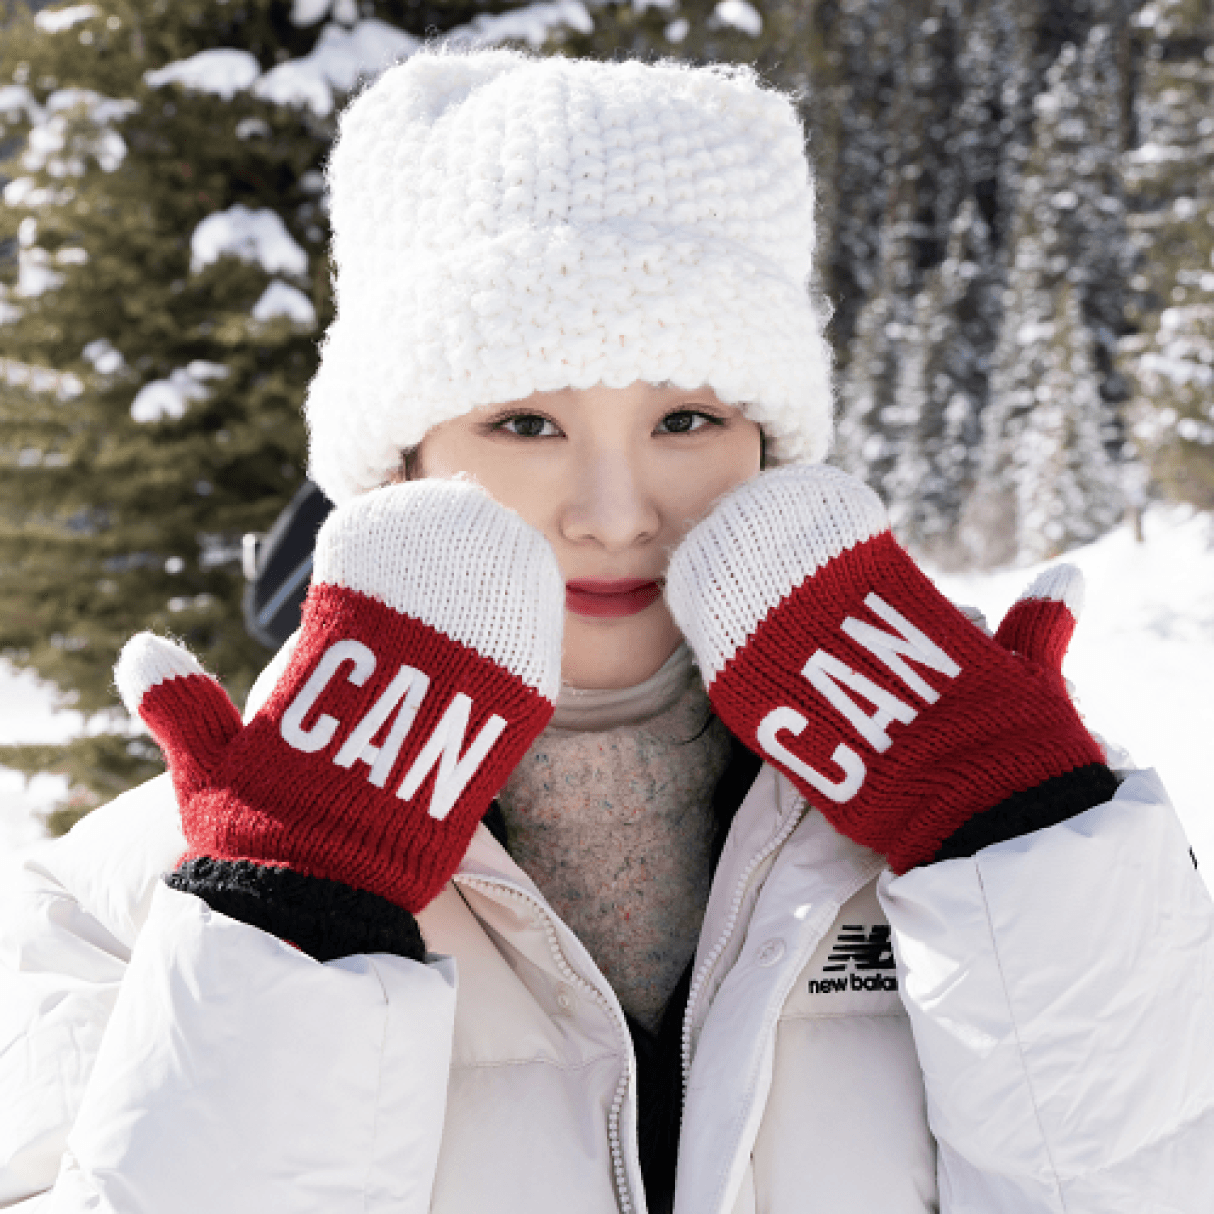 A tourist enjoying the snow holds up her Canada gloves